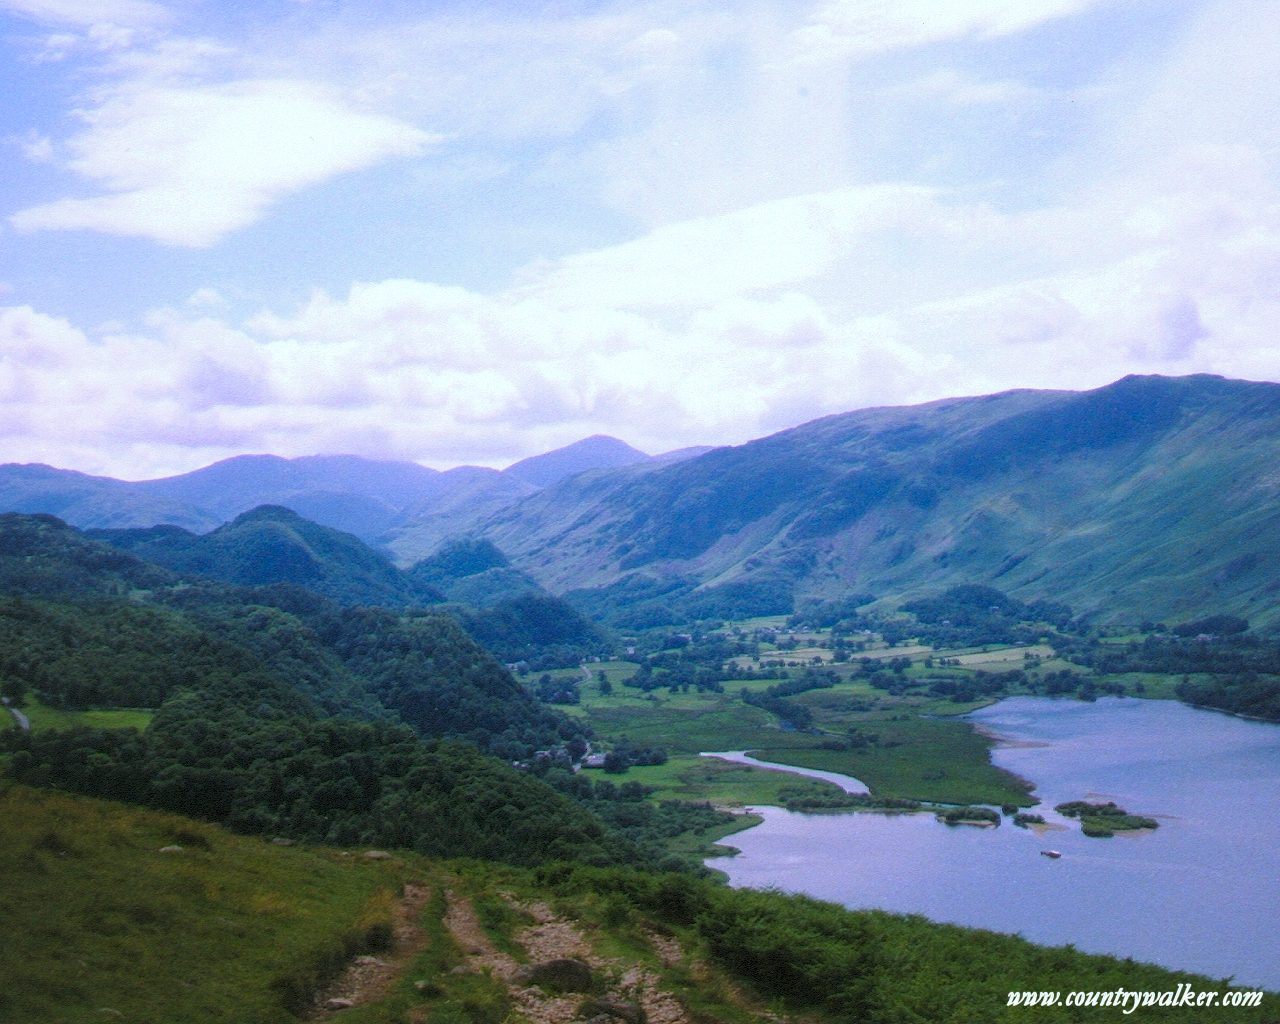 South End of Derwent Water From High Seat